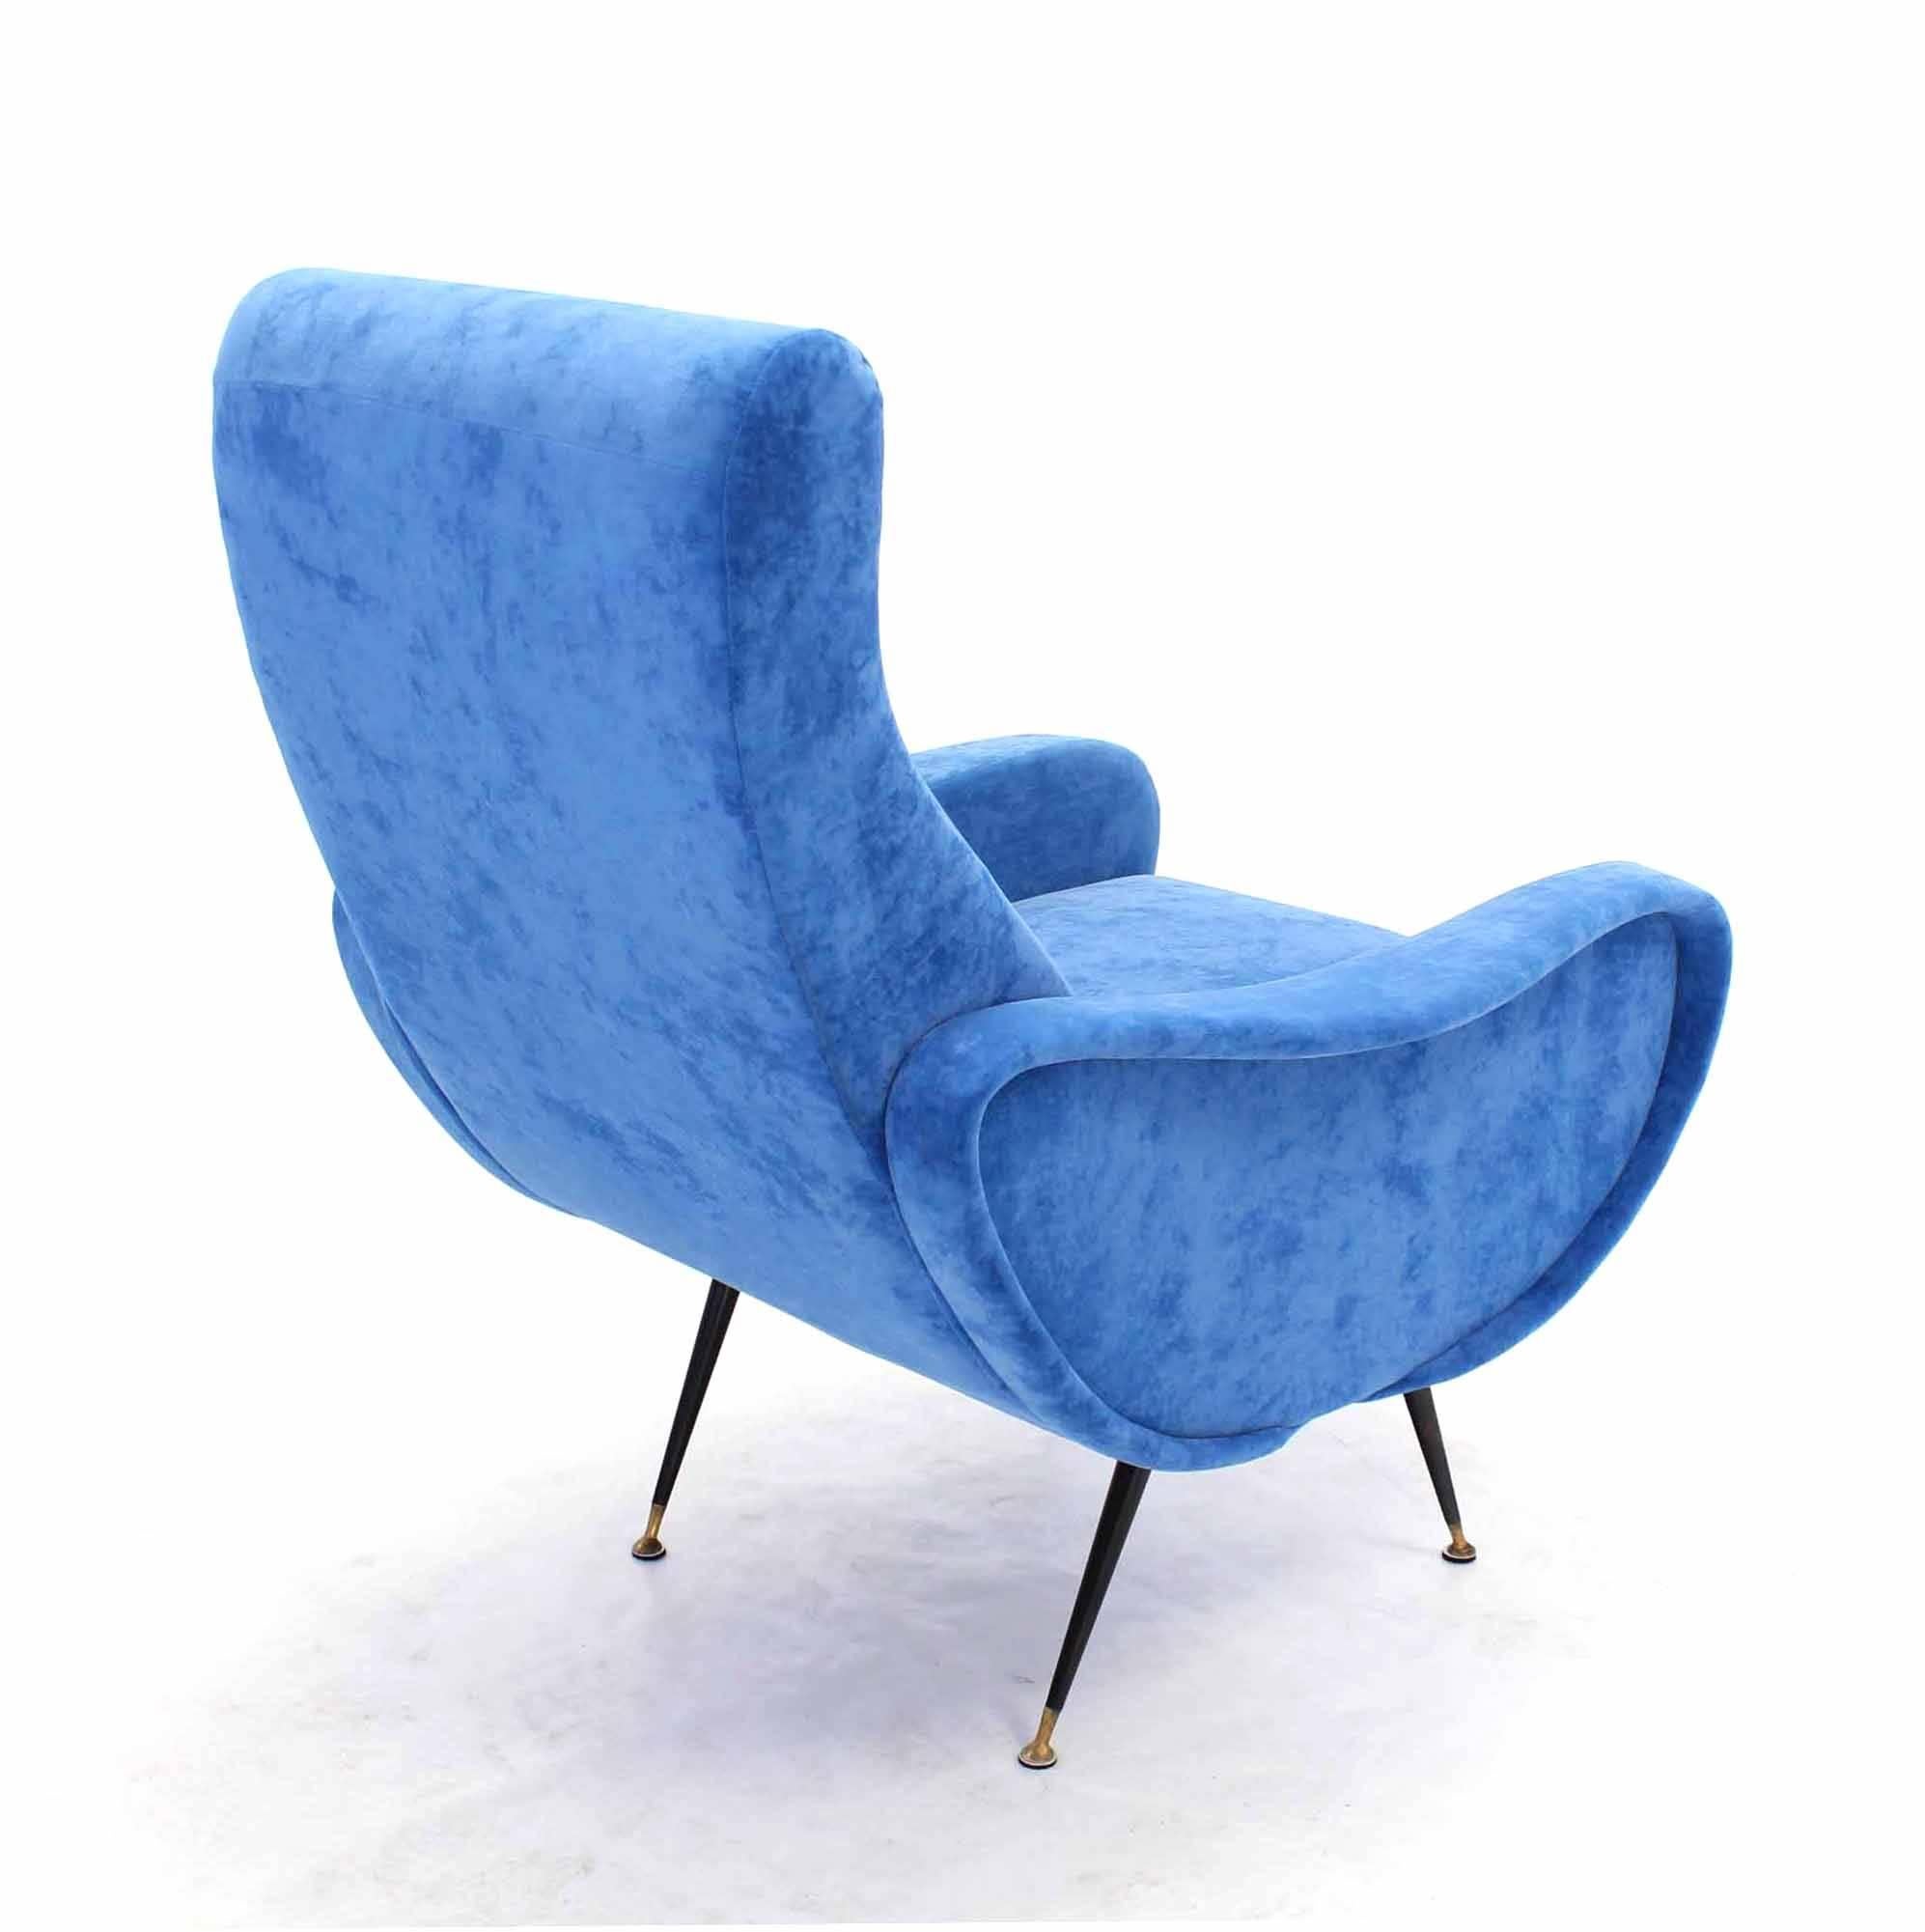 Pair of Mid-Century Italian Modern Blue Upholstery Lounge Chairs 1